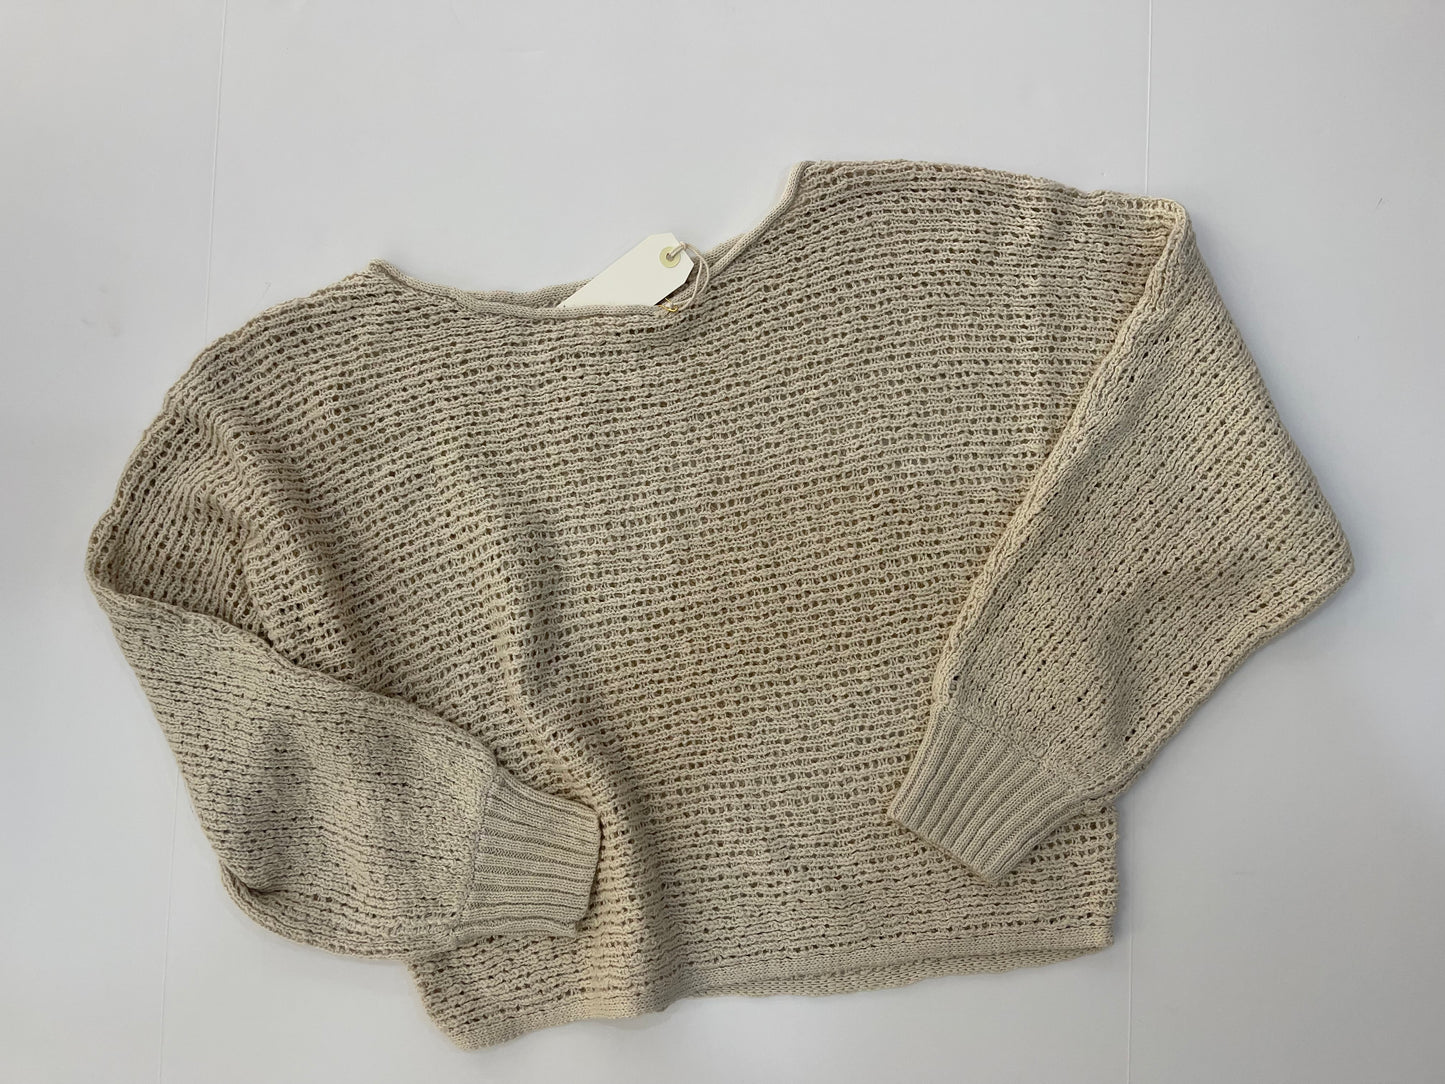 Laurel Canyon Pullover